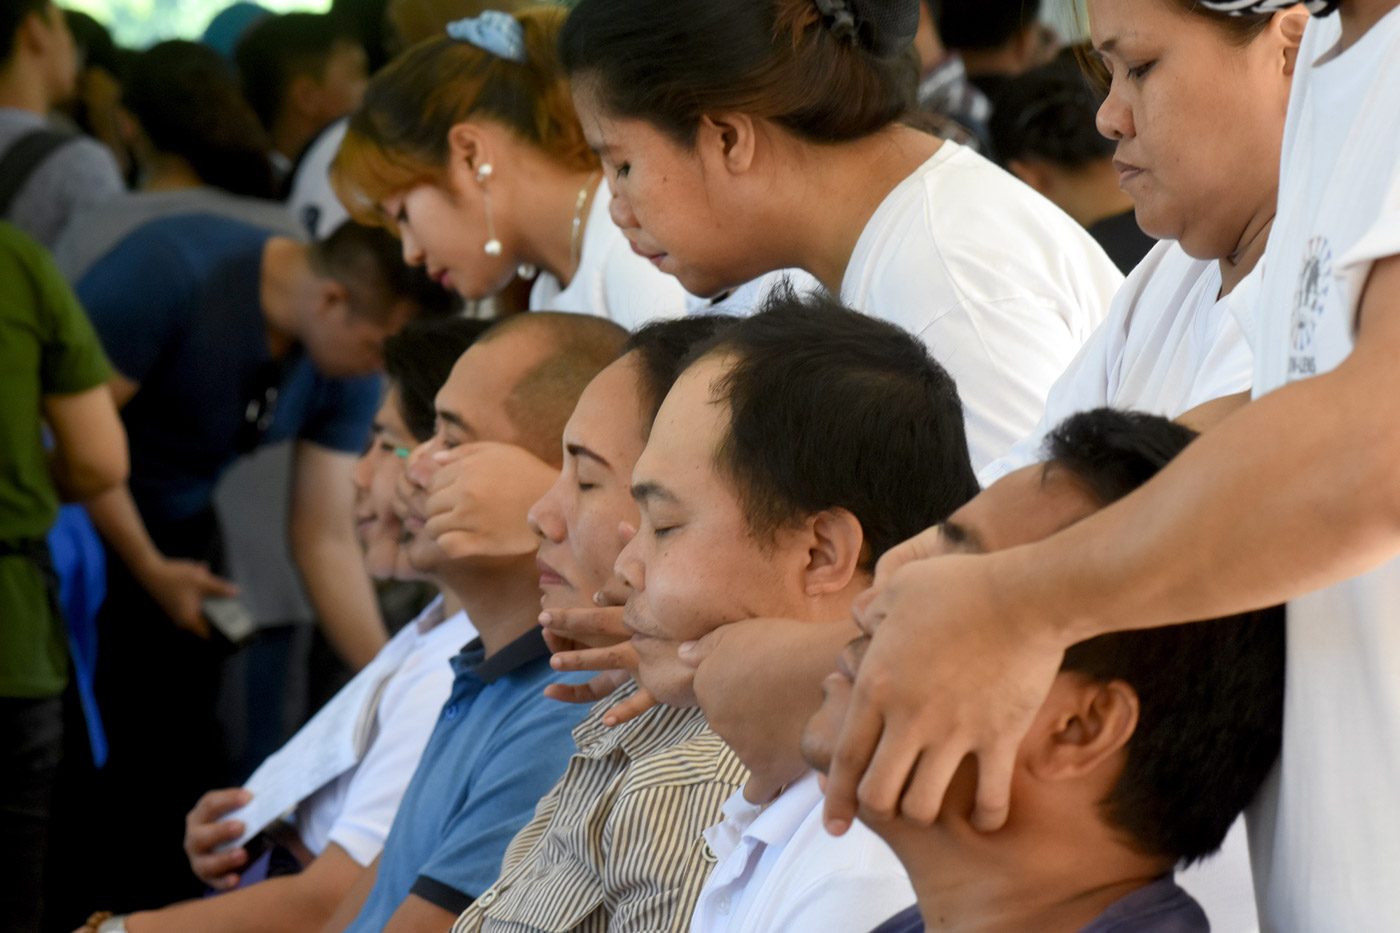 TESDA graduates offer free massage to hundreds of applicants. Photo by Angie de Silva/Rappler 